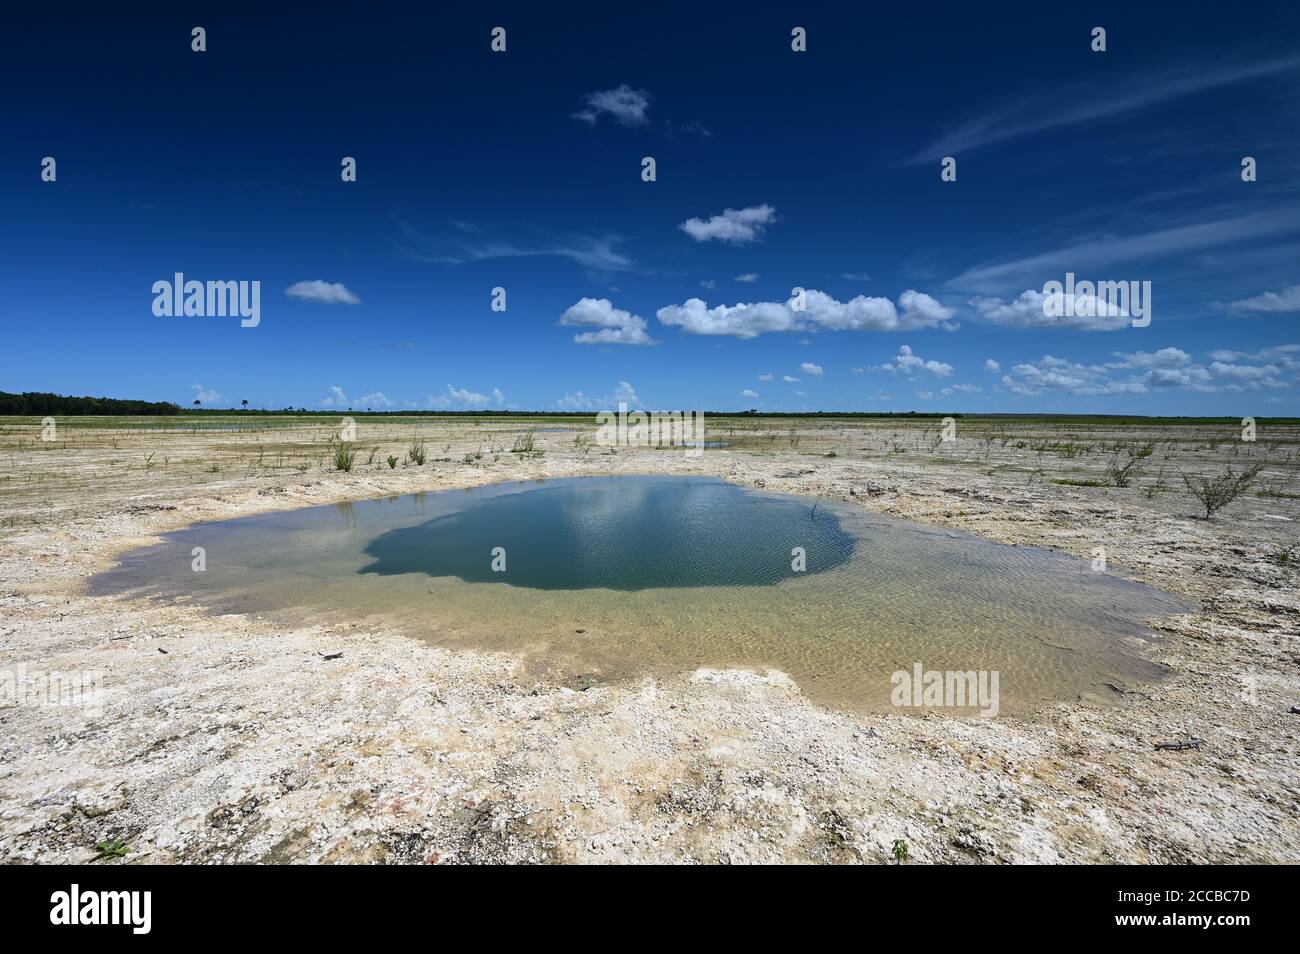 Summer clouds over Hole-in-the-Donut habitat restoration project in Everglades National Park, Florida. Stock Photo